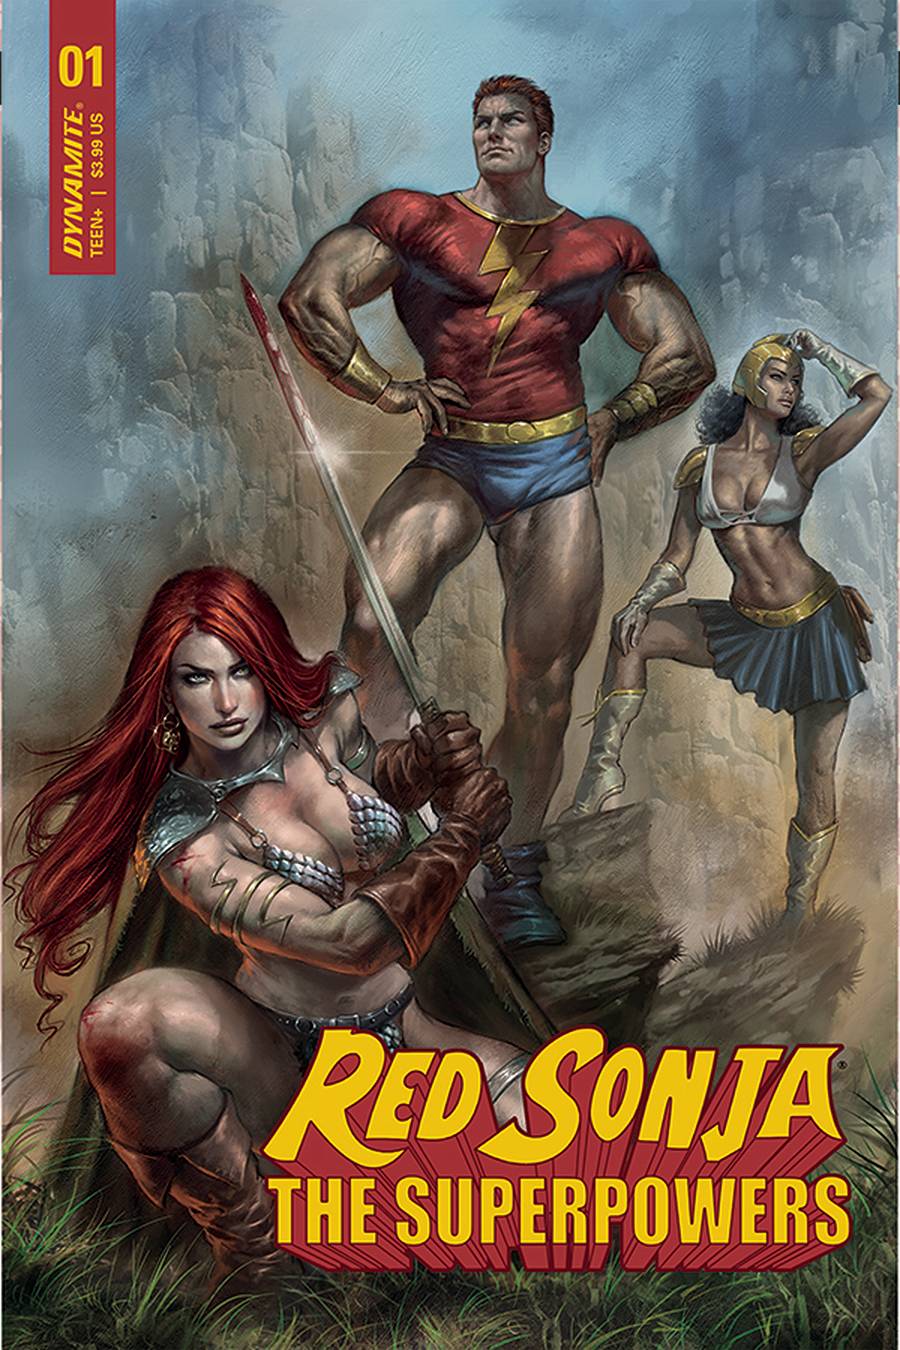 RED SONJA THE SUPERPOWERS #1 CVR A PARRILLO | L.A. Mood Comics and Games